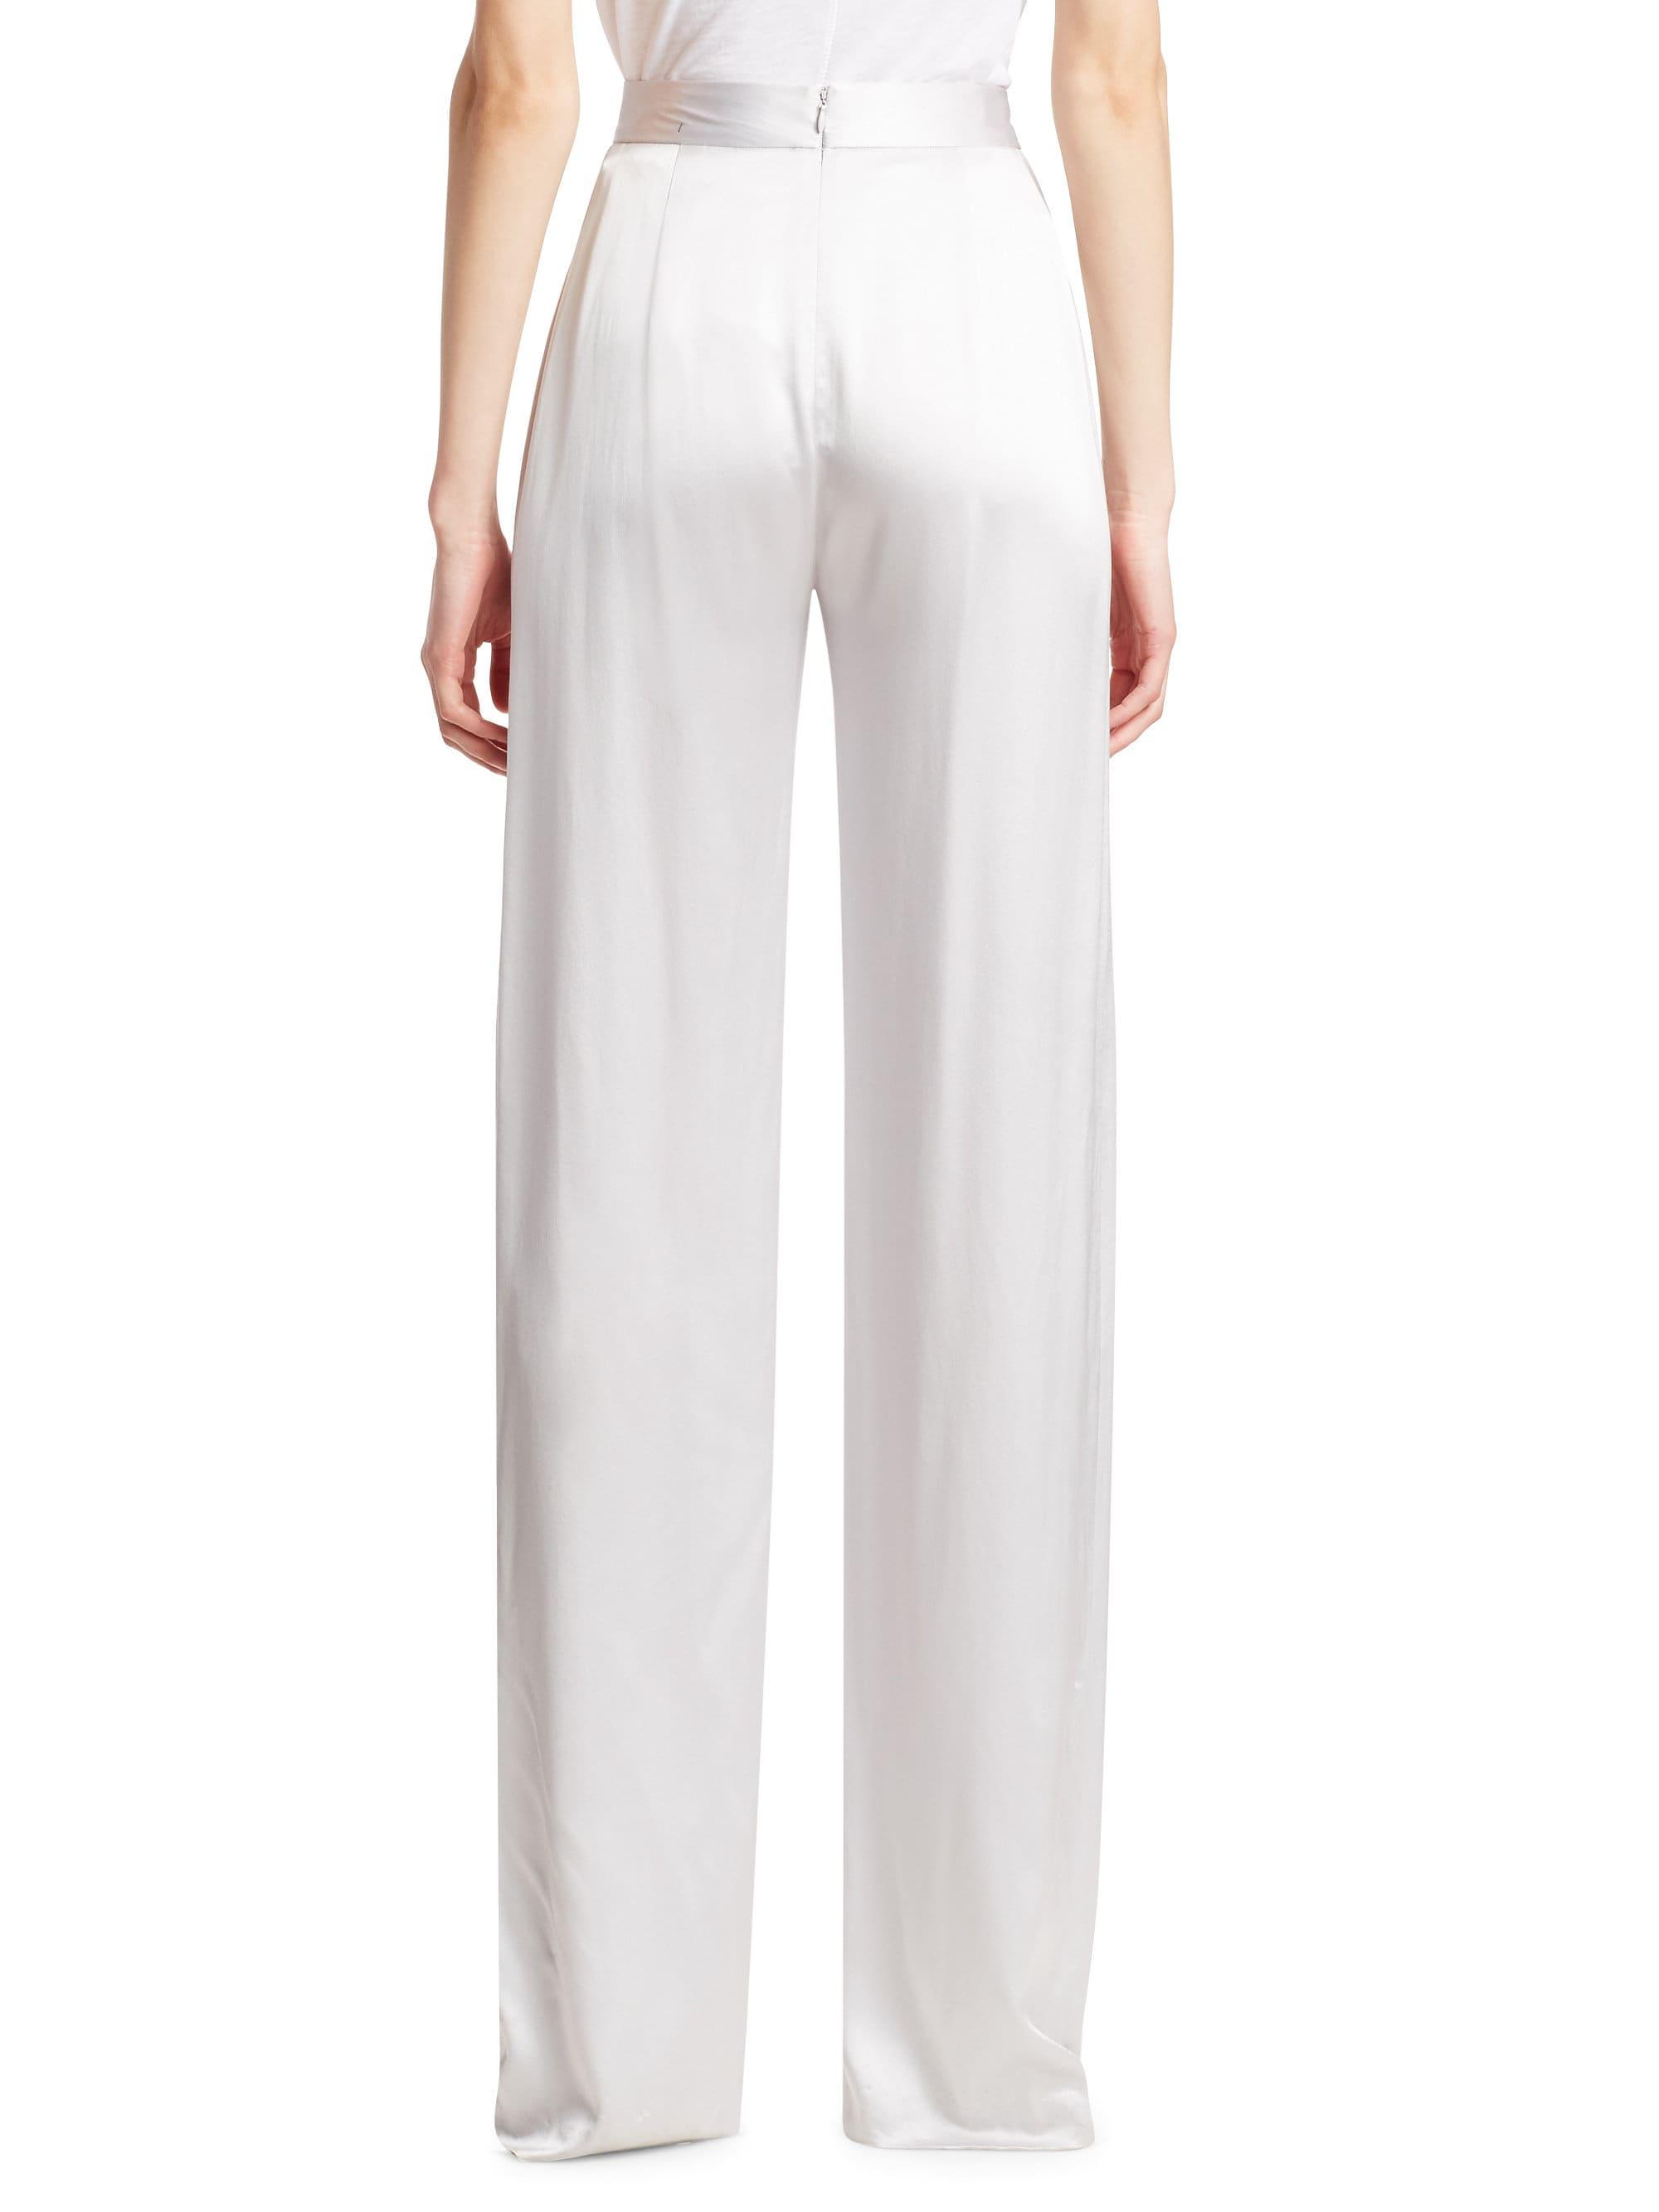 Brandon Maxwell Sueded Charmeuse Wide-leg Pants in Metallic - Lyst